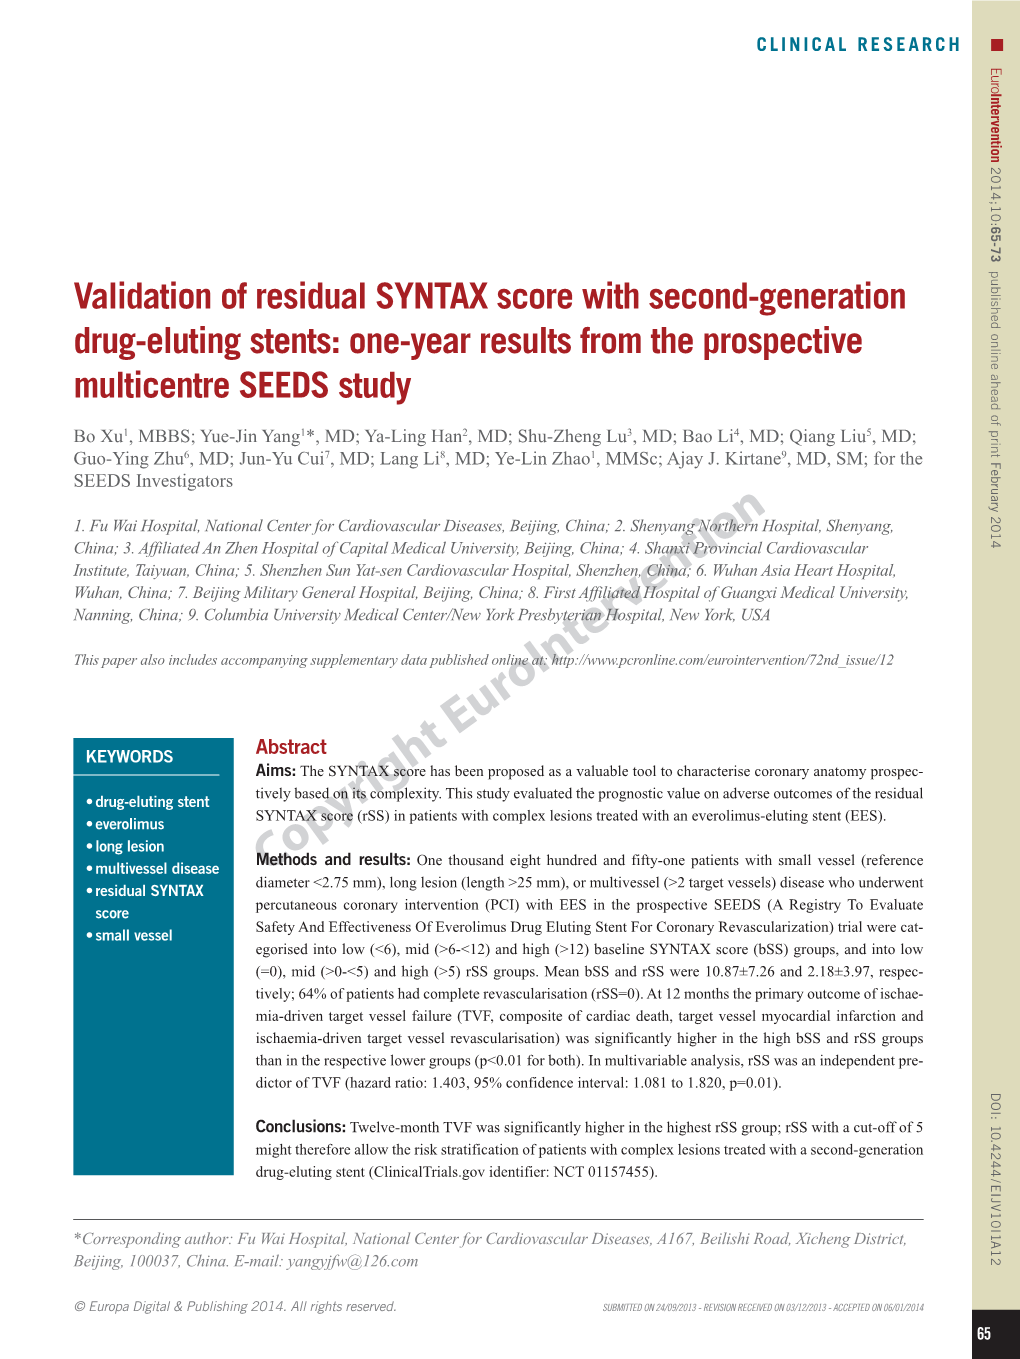 Validation of Residual SYNTAX Score with Second-Generation Drug-Eluting Stents: One-Year Results from the Prospective Multicentre SEEDS Study